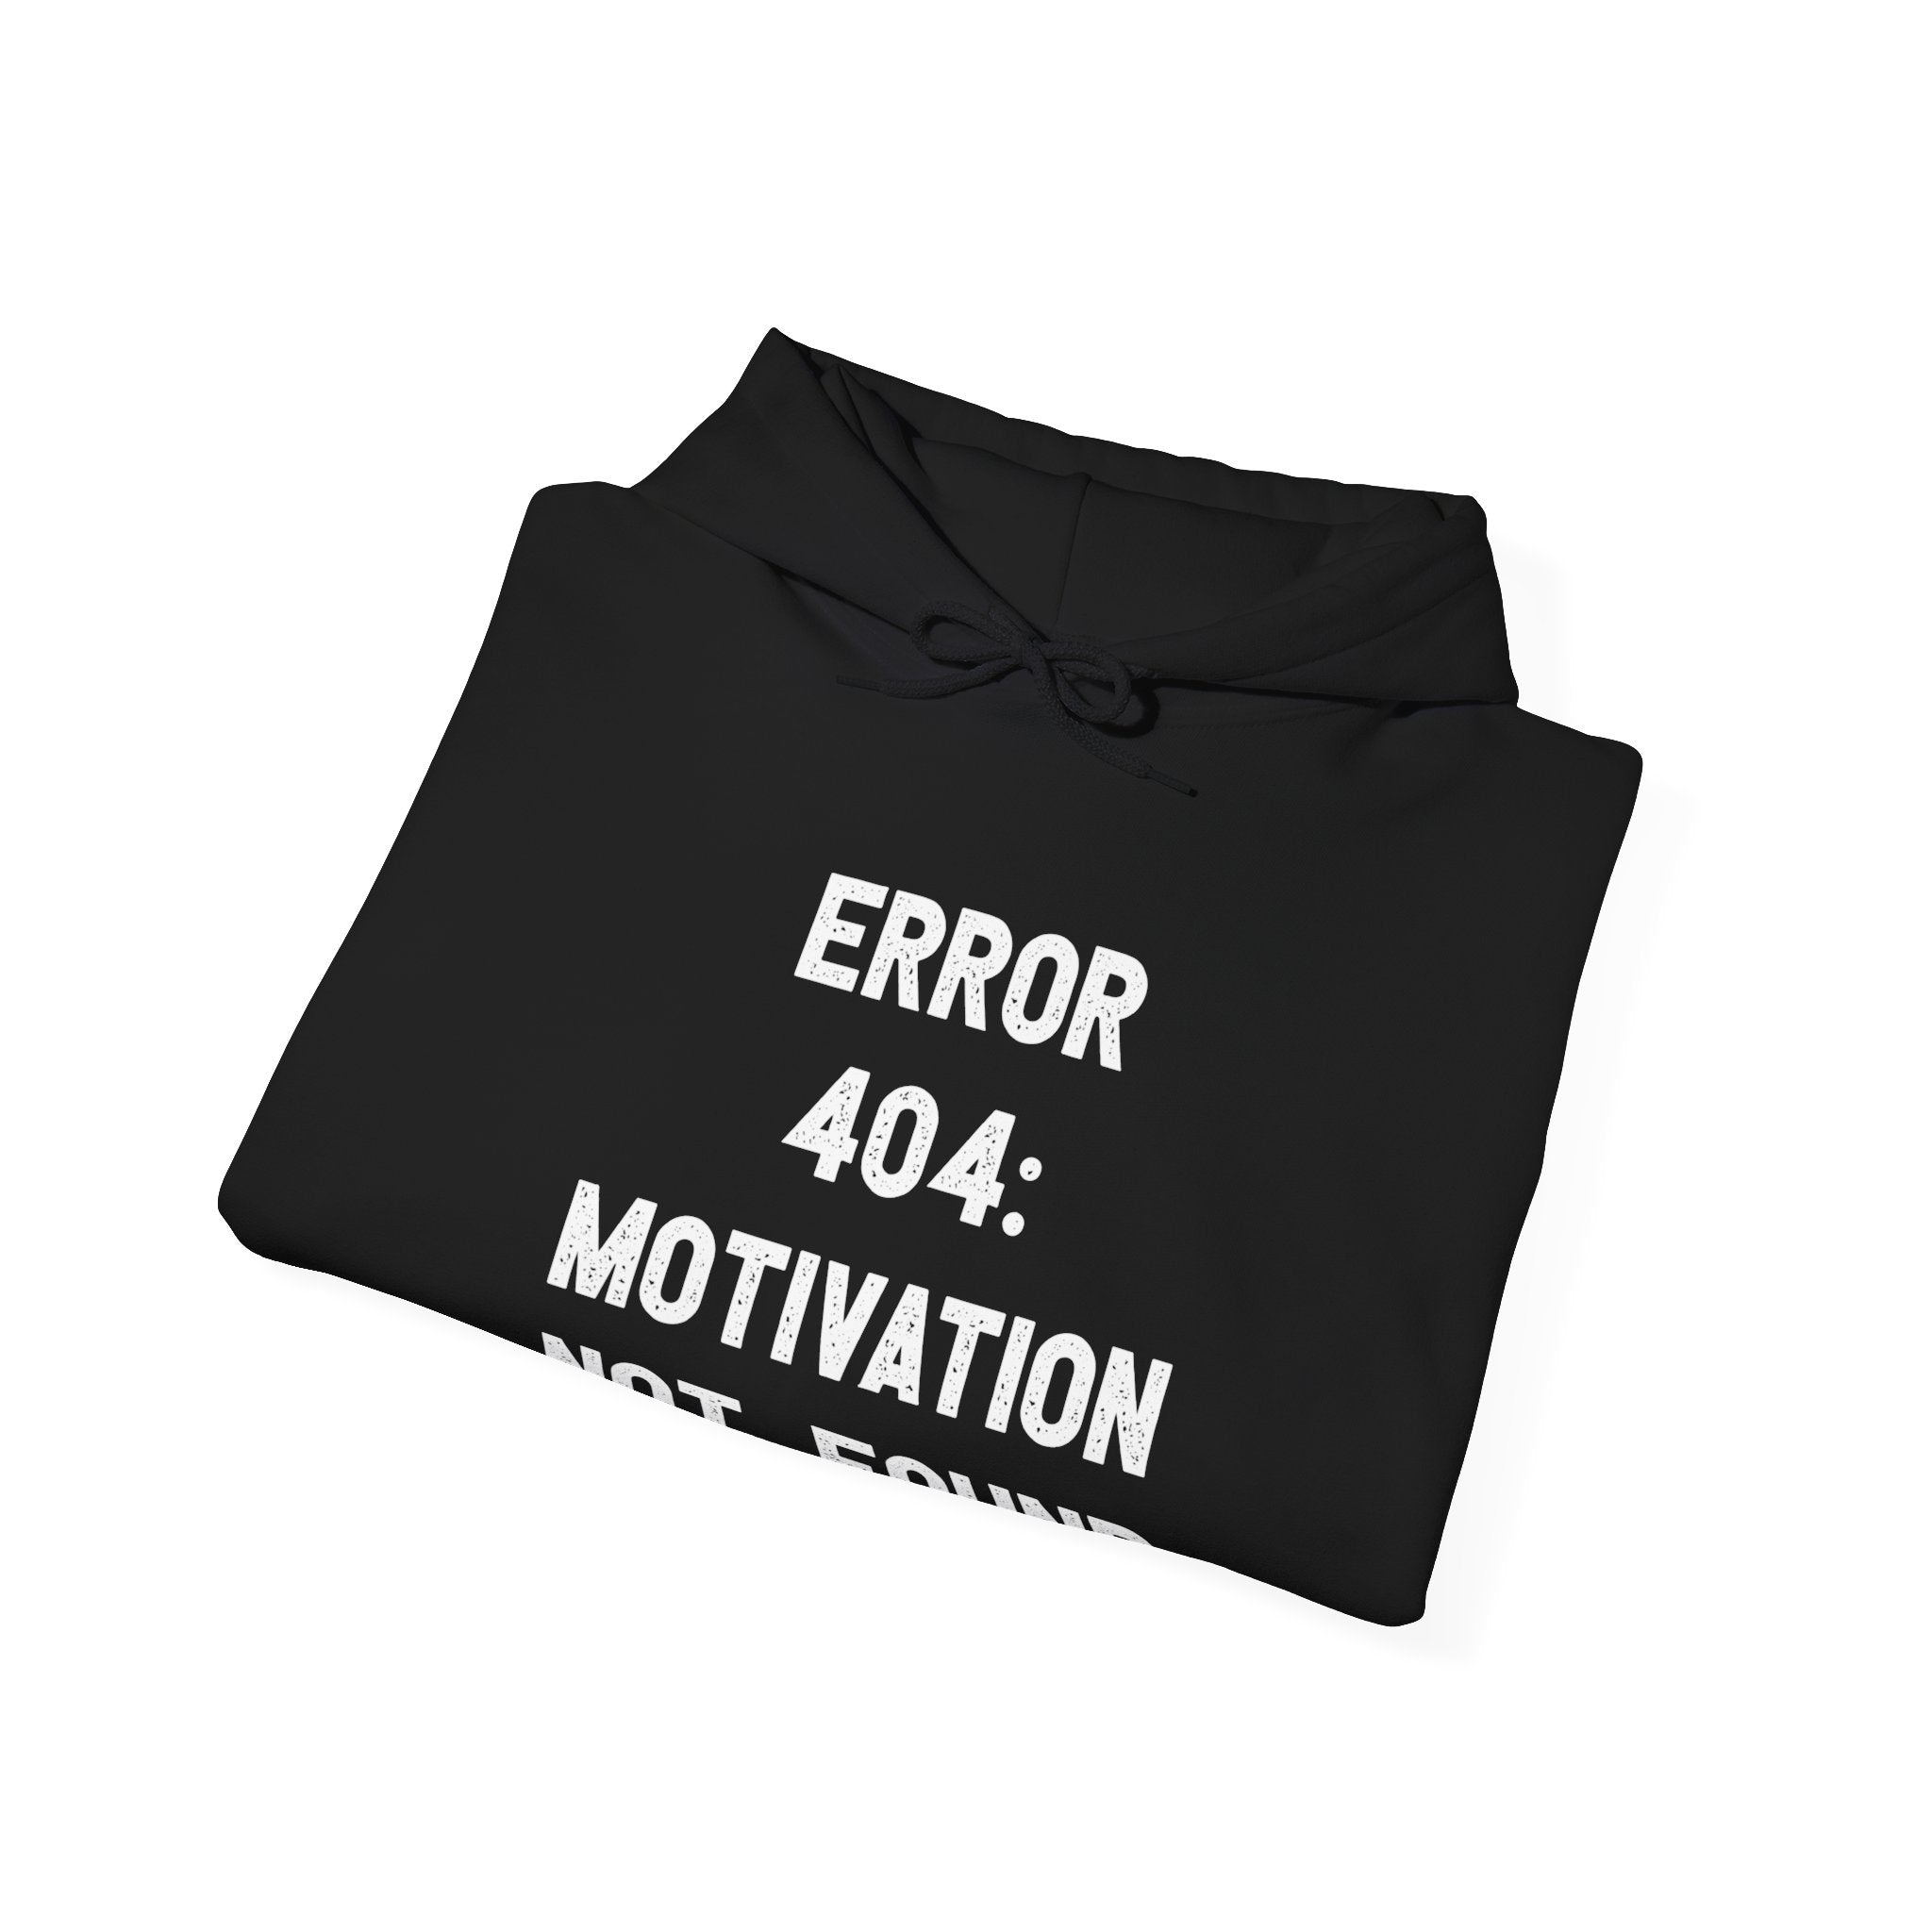 Error 404: Motivation not found - Hooded Sweatshirt with the text "ERROR 404. MOTIVATION NOT FOUND" printed in white. Perfect for everyday wear, the hoodie is neatly folded.